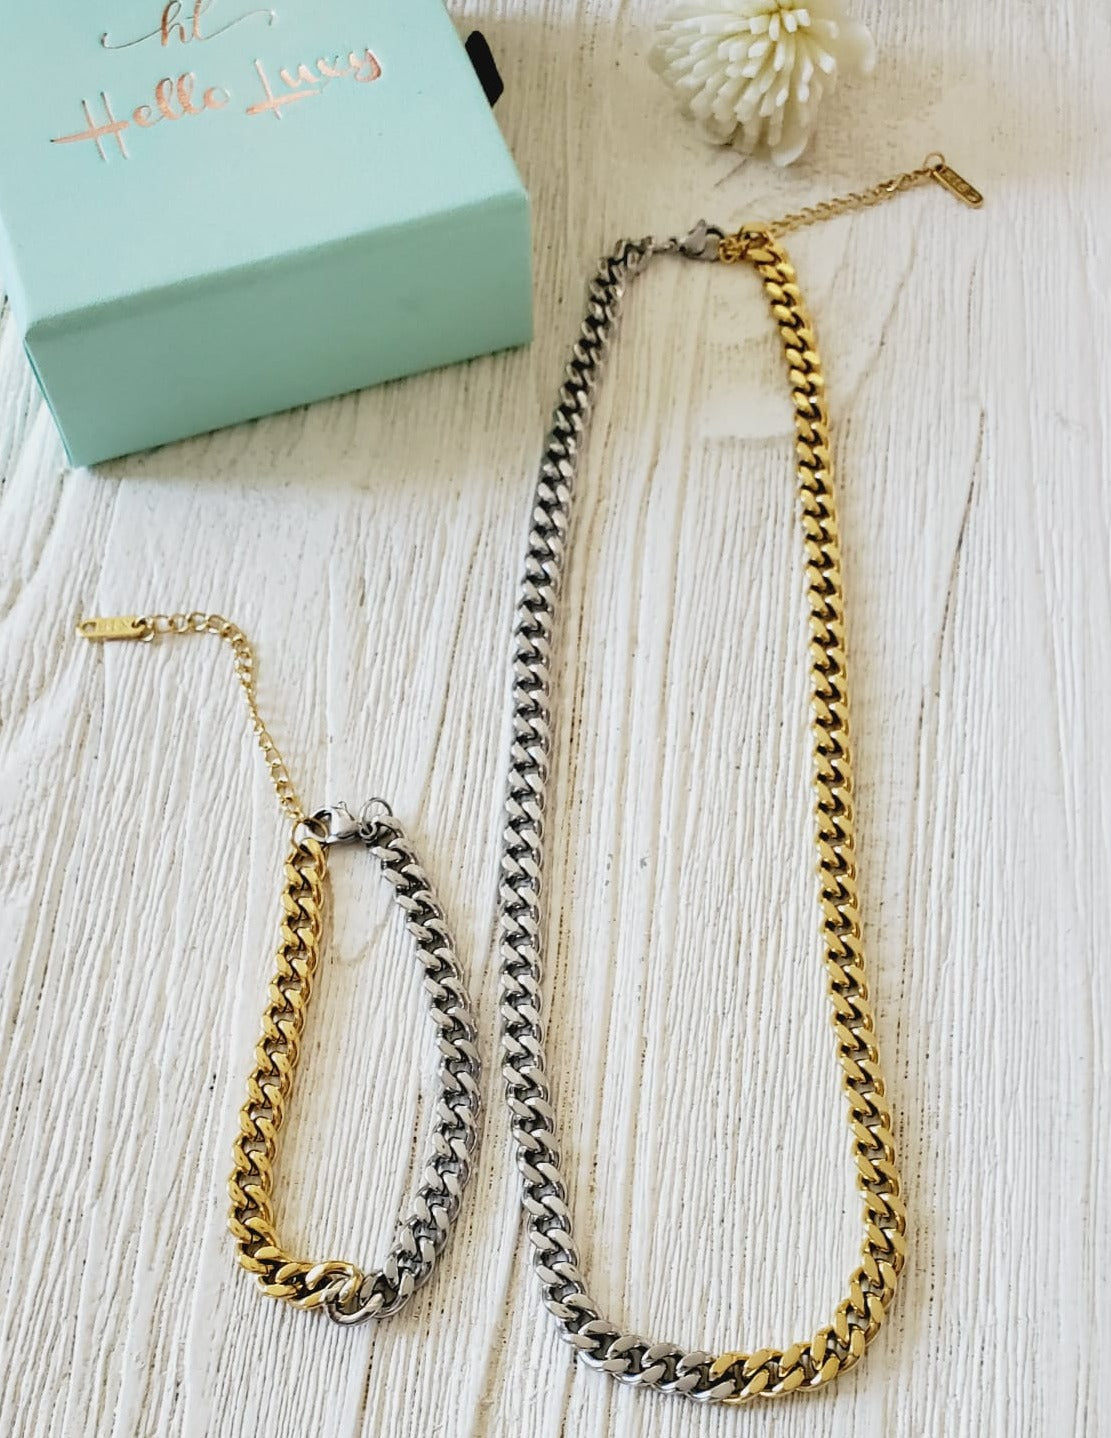 Minimalist chain, Double tone Chain, silver and gold Necklace, double tone cuban Chain, Water resistant jewelry, water resistant Necklace, Water resistant bracelet, vintage jewelry, vintage jewelry, vintage necklace, 14k gold necklace, 14k gold jewelry, 14k gold necklace, fine jewelry, fine necklace, fine bracelet, 6mm gold and silver chain, bold necklace, bold jewelry, handmade jewelry, fine jewelry brand, hello luxy, joyeria fina, 18k gold plated chain, 18k gold plated jewelry, gift for her